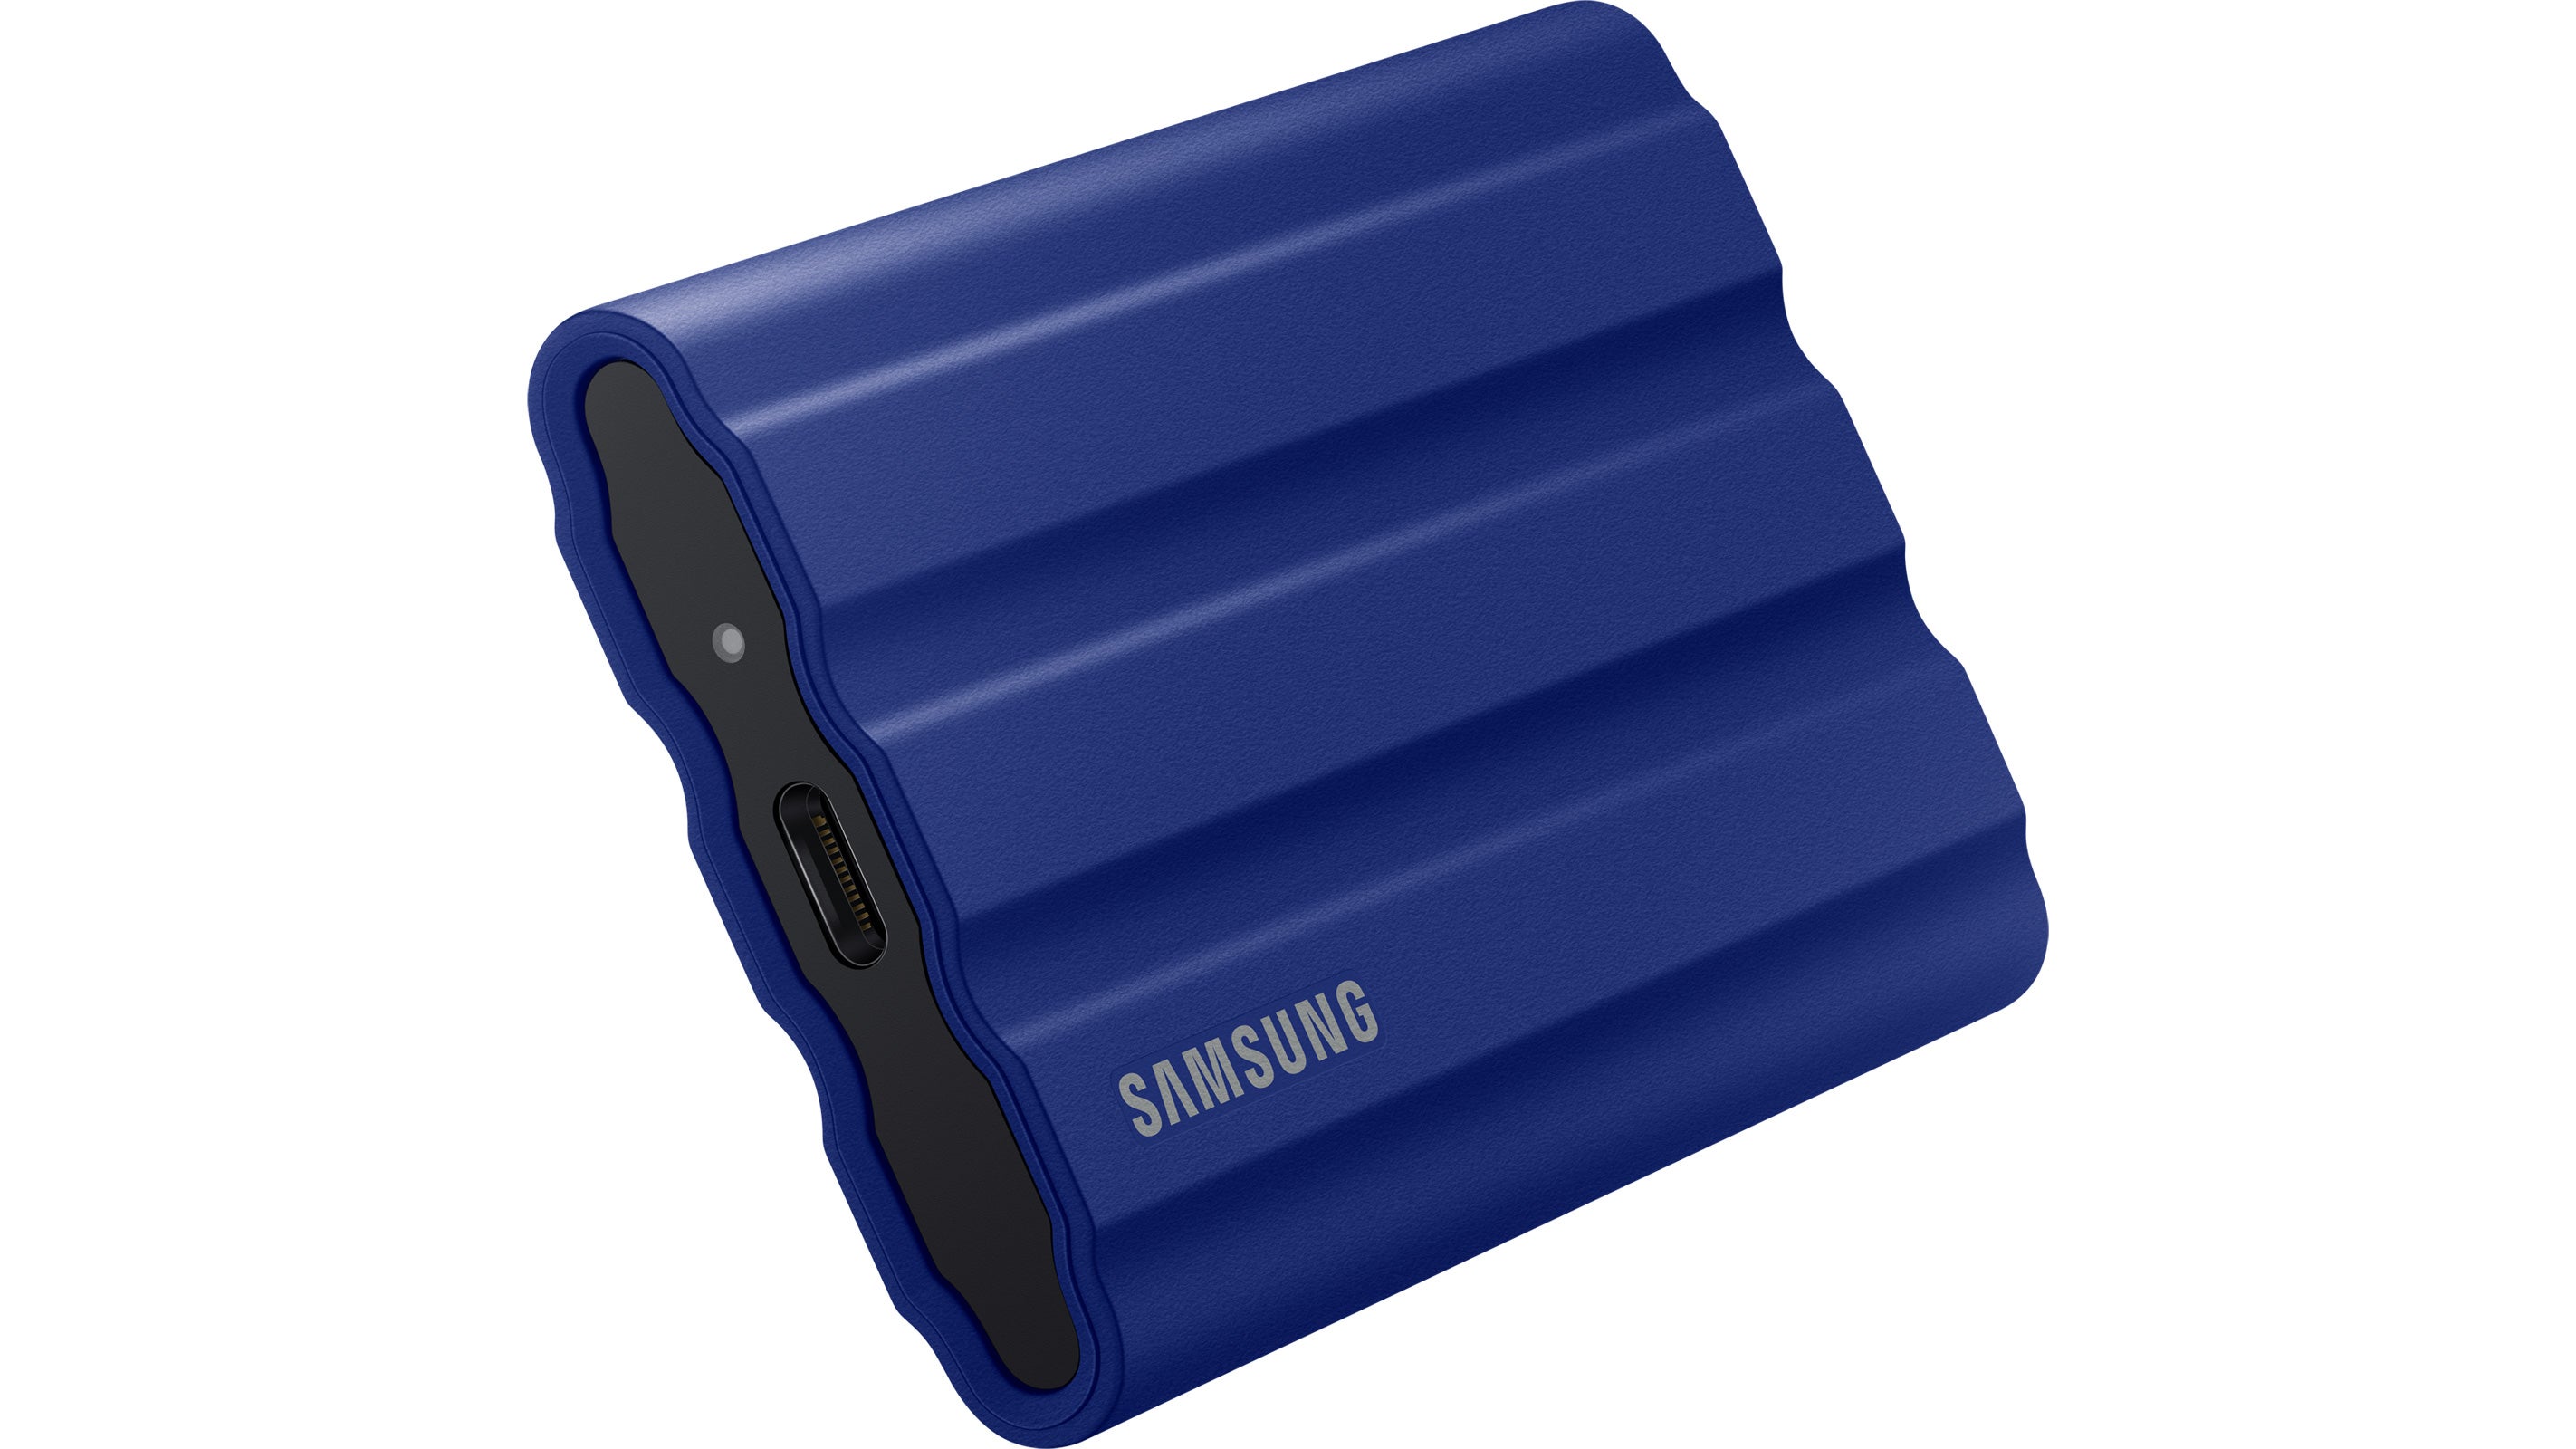 samsung t7 shield, a nvme ssd that connects via usb and has a thick armour